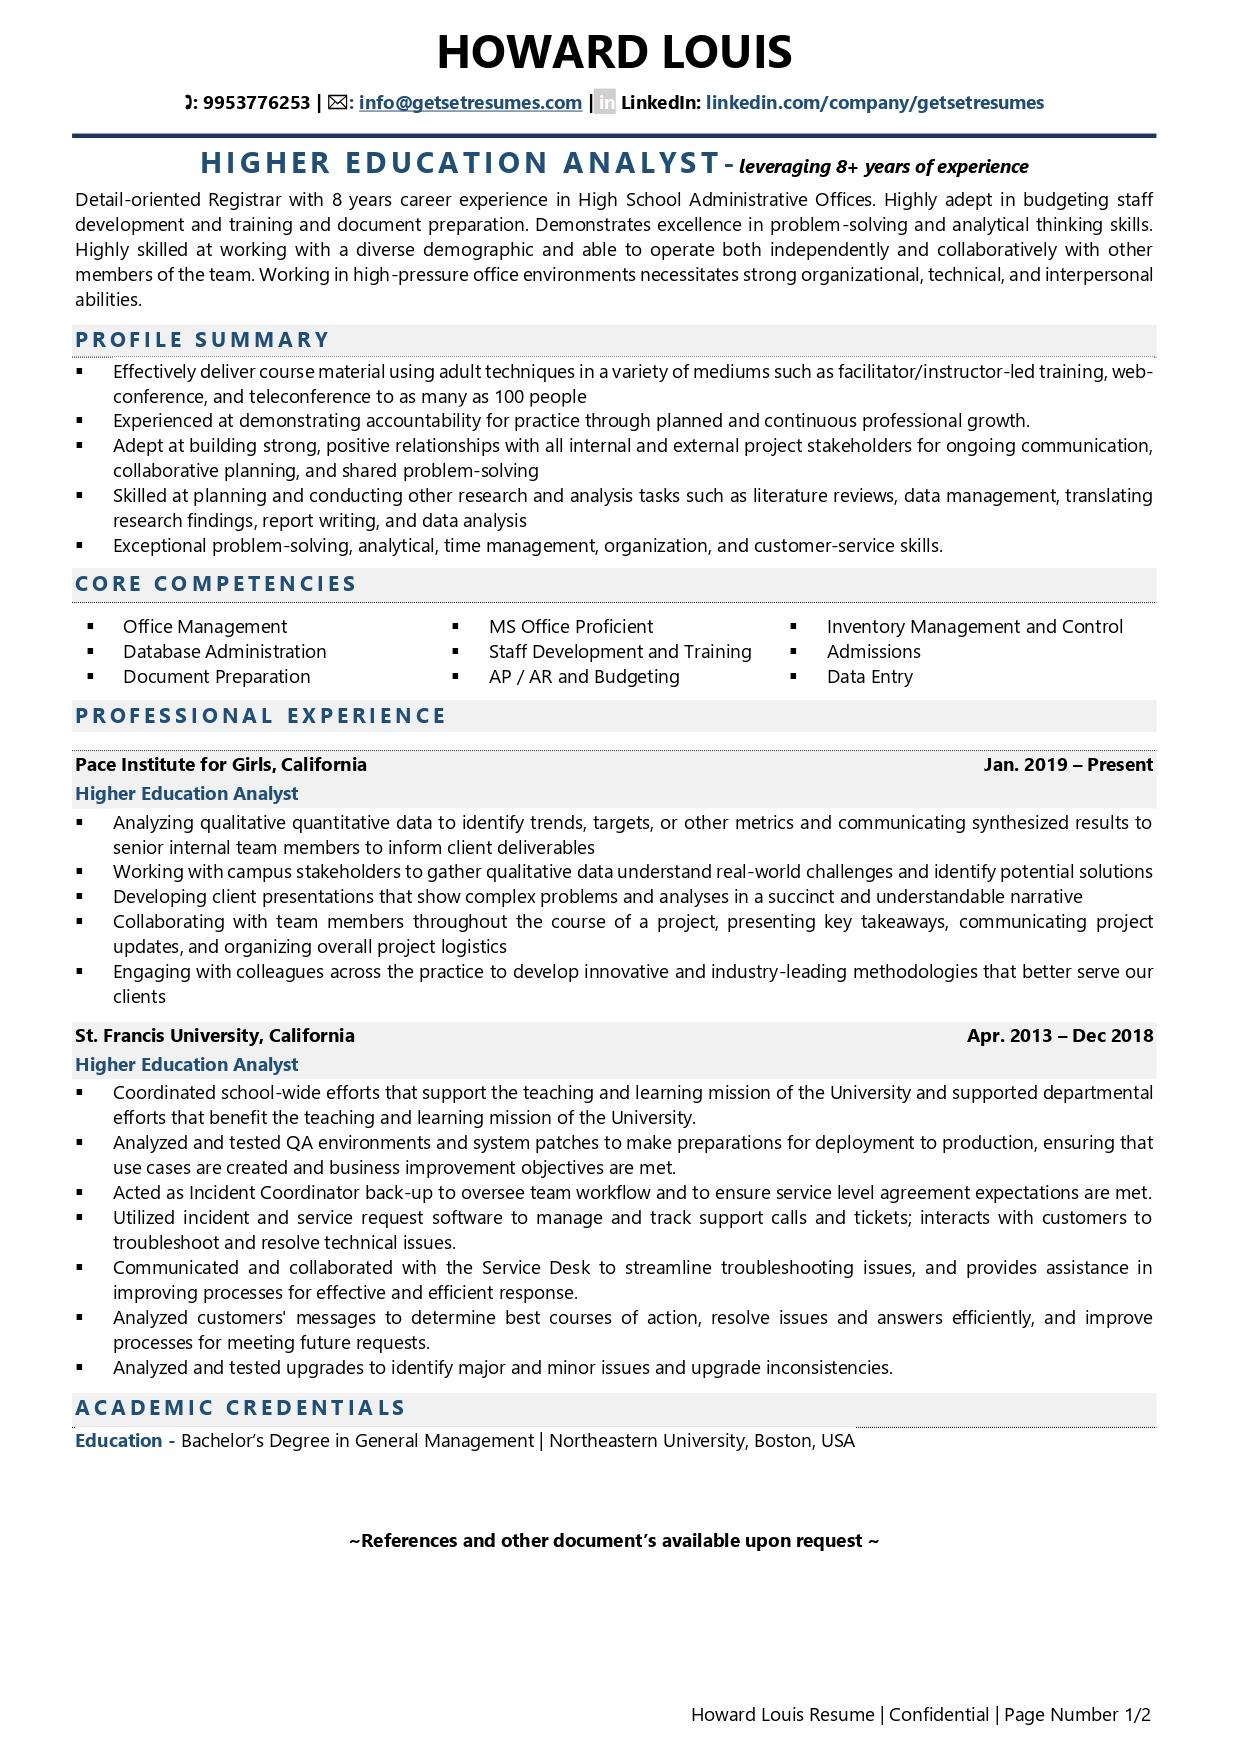 Higher Education Analyst - Resume Example & Template